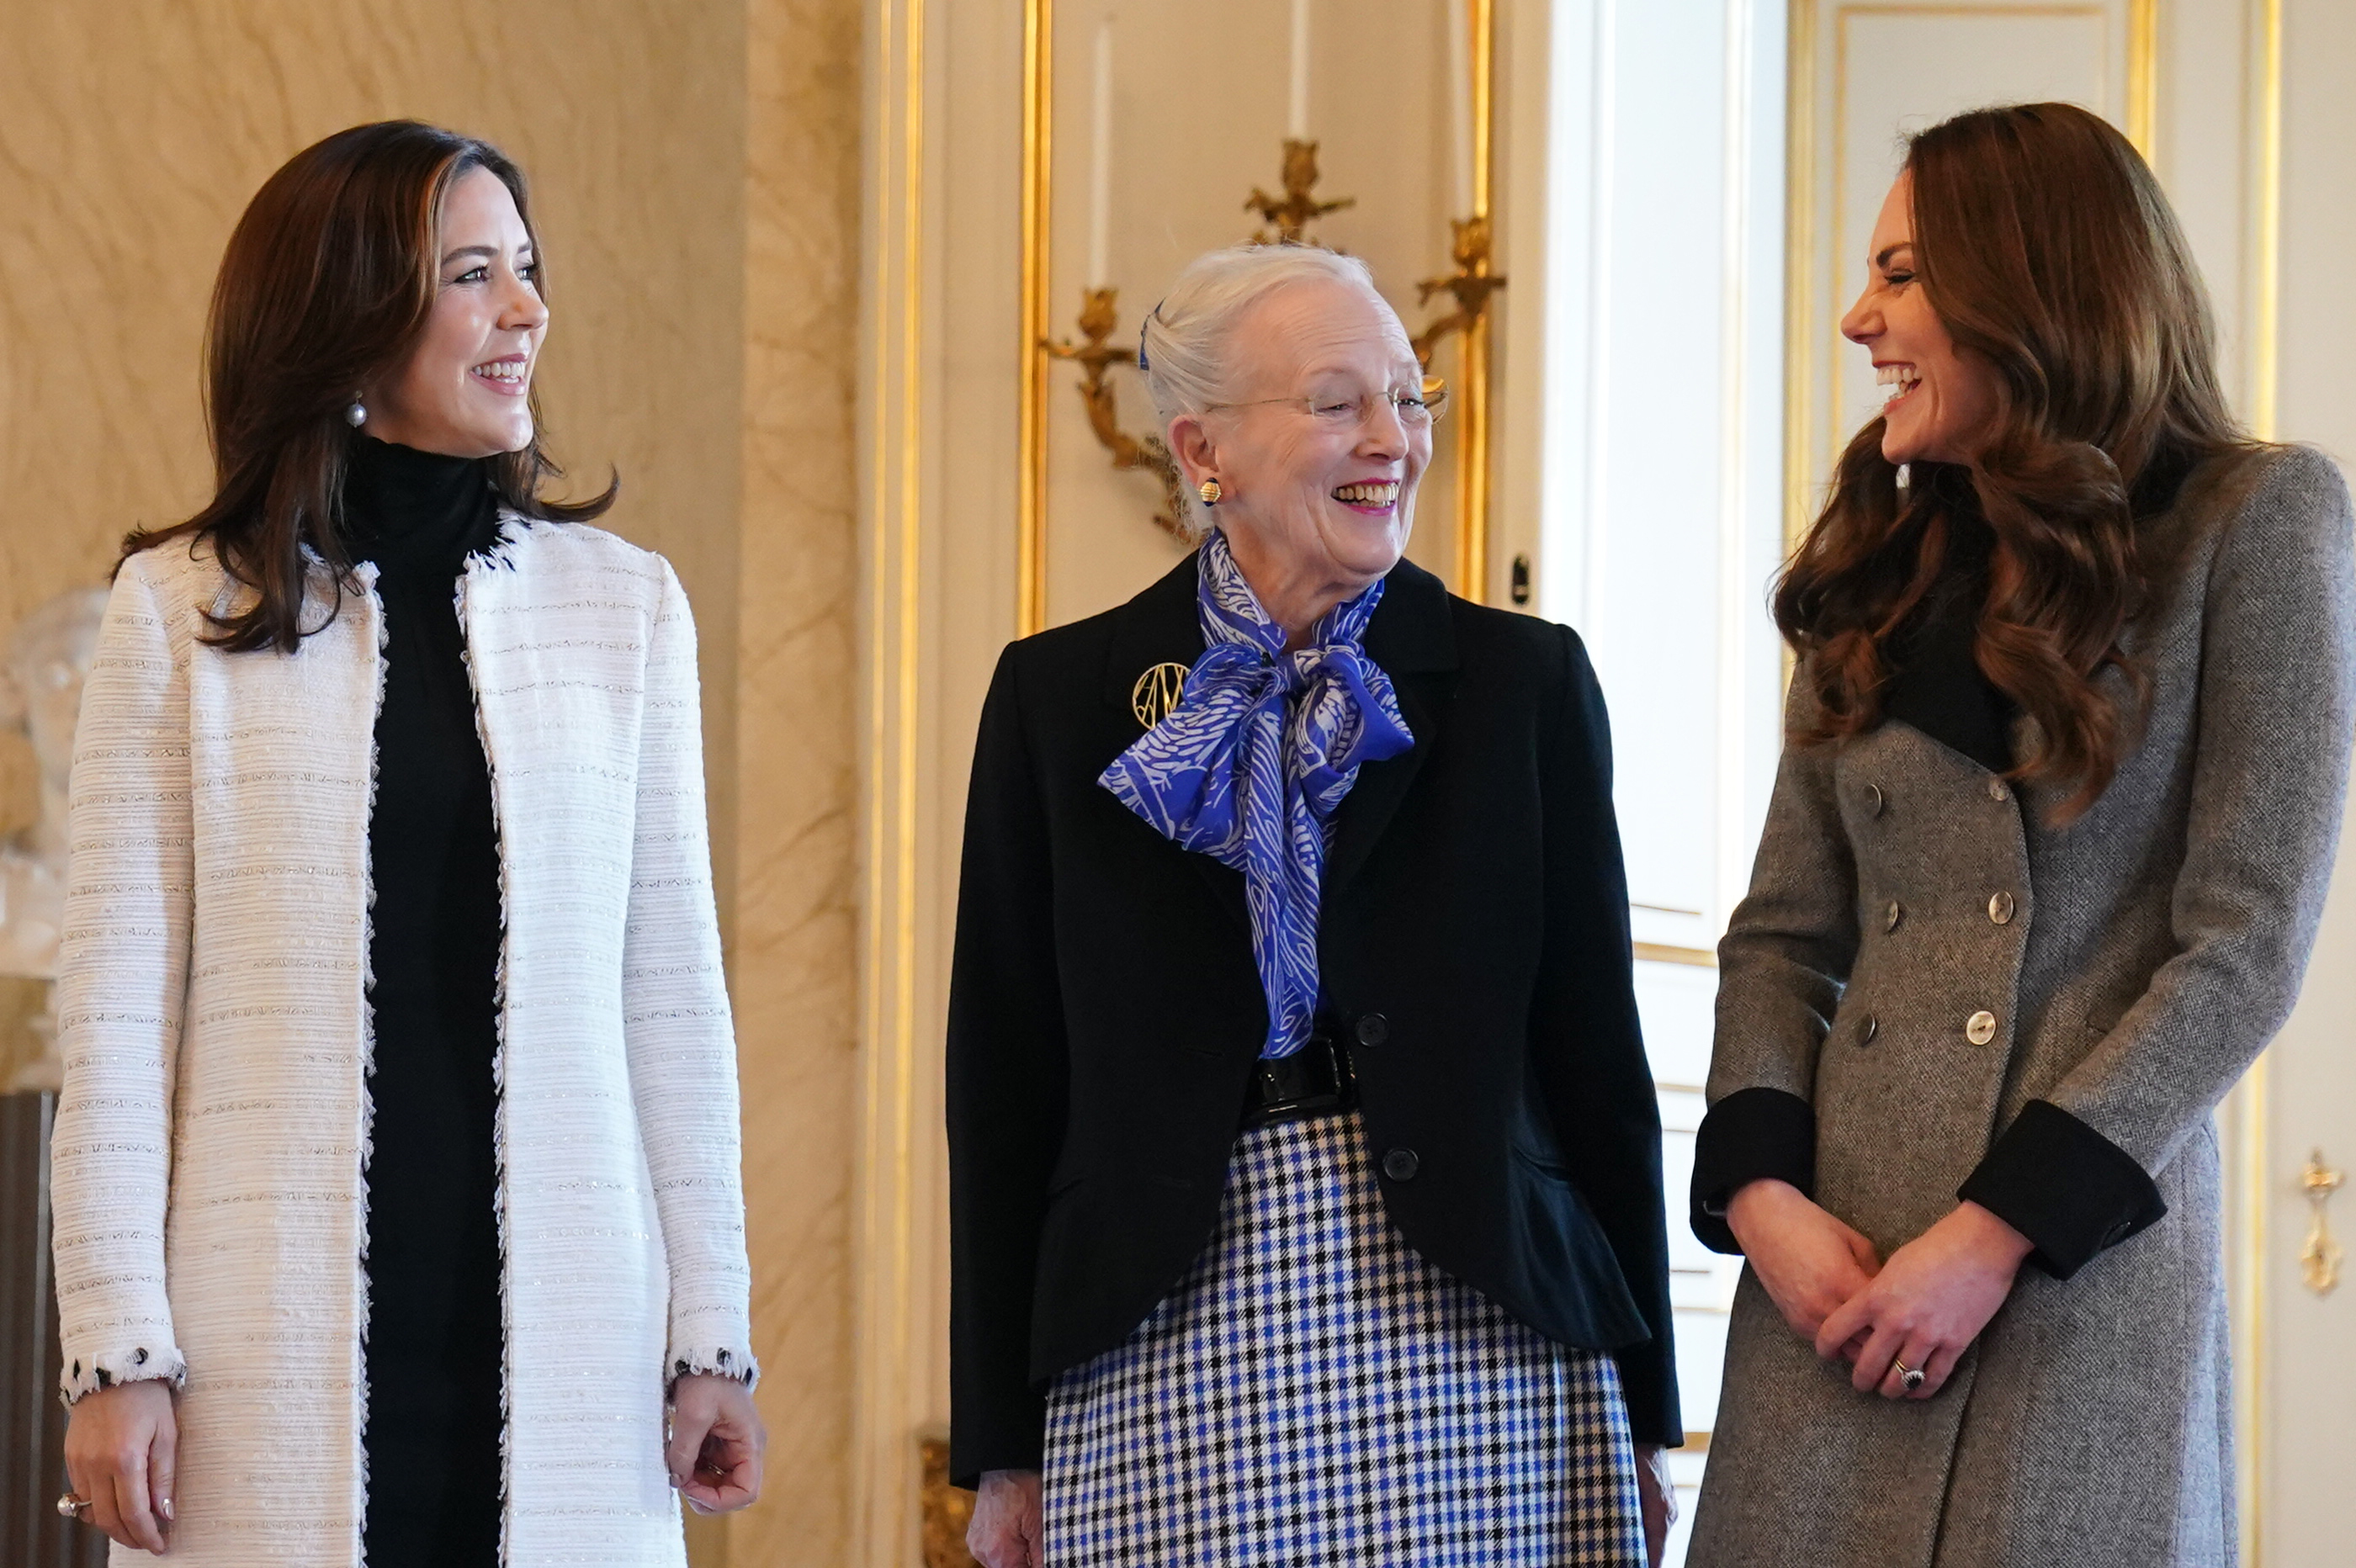 The Duchess of Cambridge is welcomed by Queen Margrethe II (centre) and Crown Princess Mary of Denmark during an audience at Christian IX's Palace, Copenhagen, Denmark, on day two of a two-day working visit with The Royal Foundation Centre for Early Childhood. Picture date: Wednesday February 23, 2022.